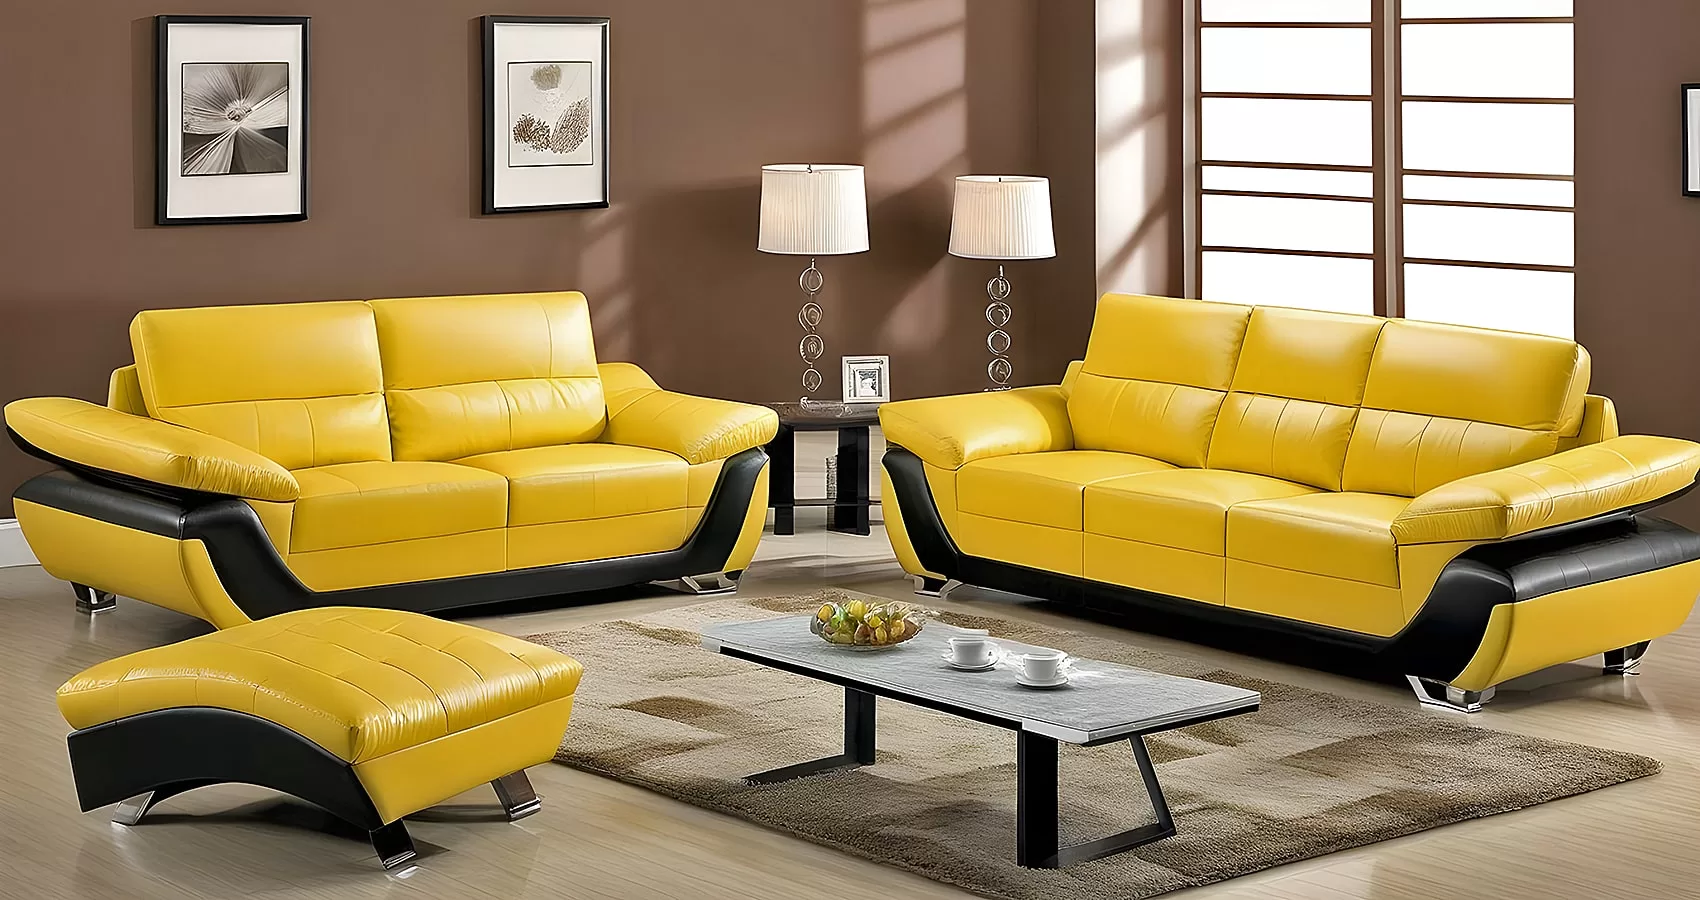 Leather Yellow Sofa | Leather Yellow Couch: A Stylish and Vibrant Addition to Your Home